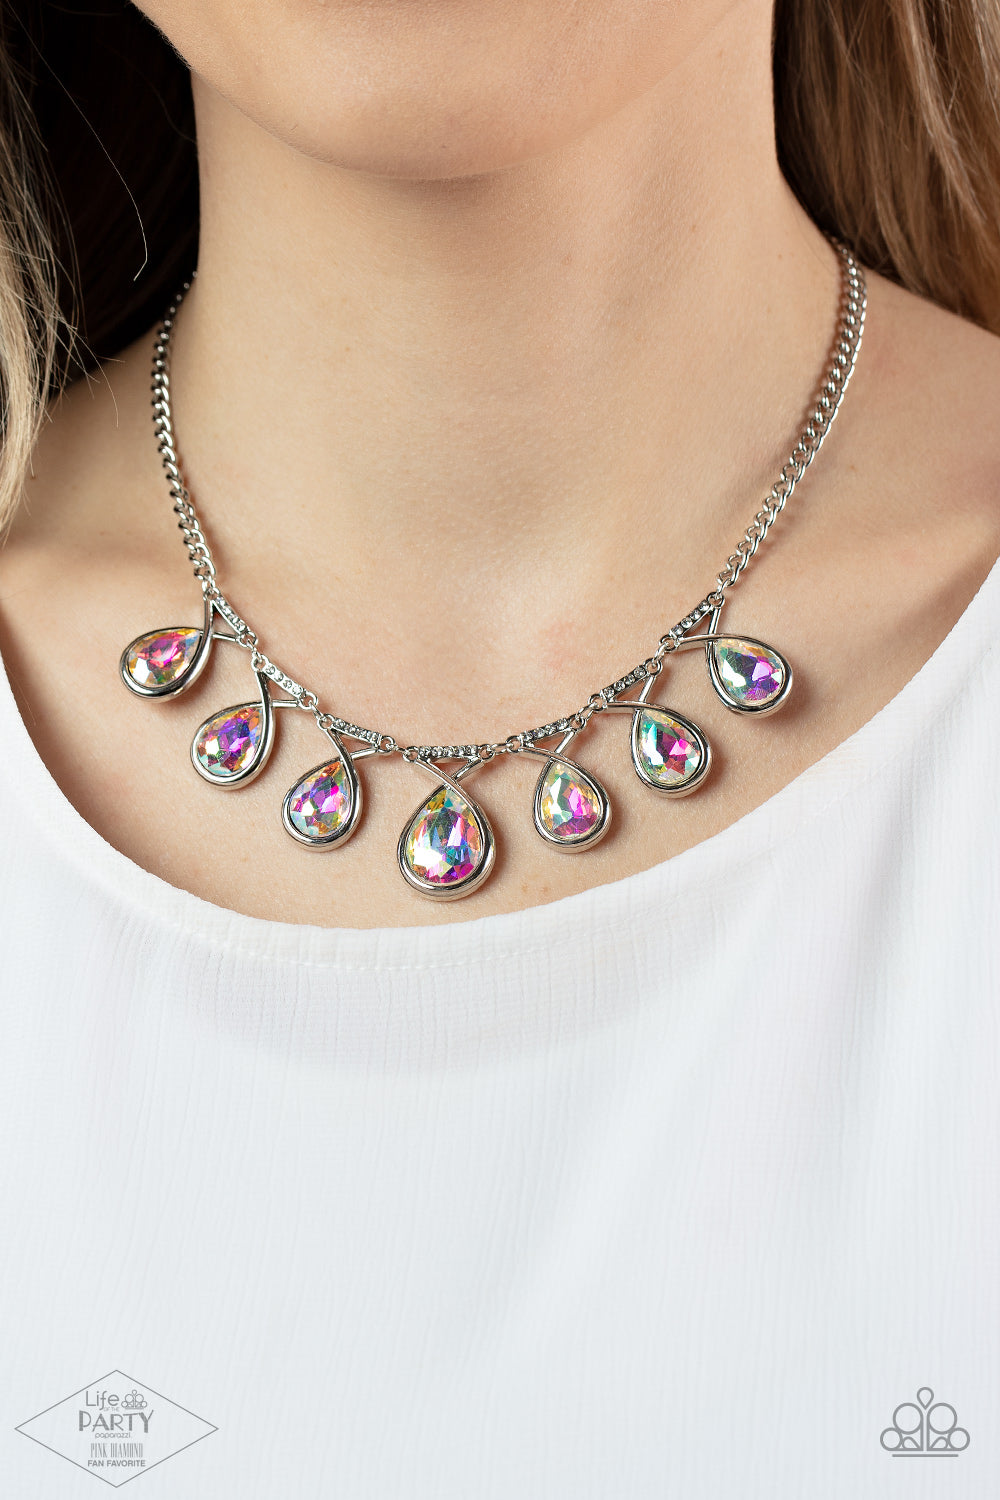 Paparazzi Accessories: Love At Fierce Sight - Multi Iridescent Necklace - Life of the Party